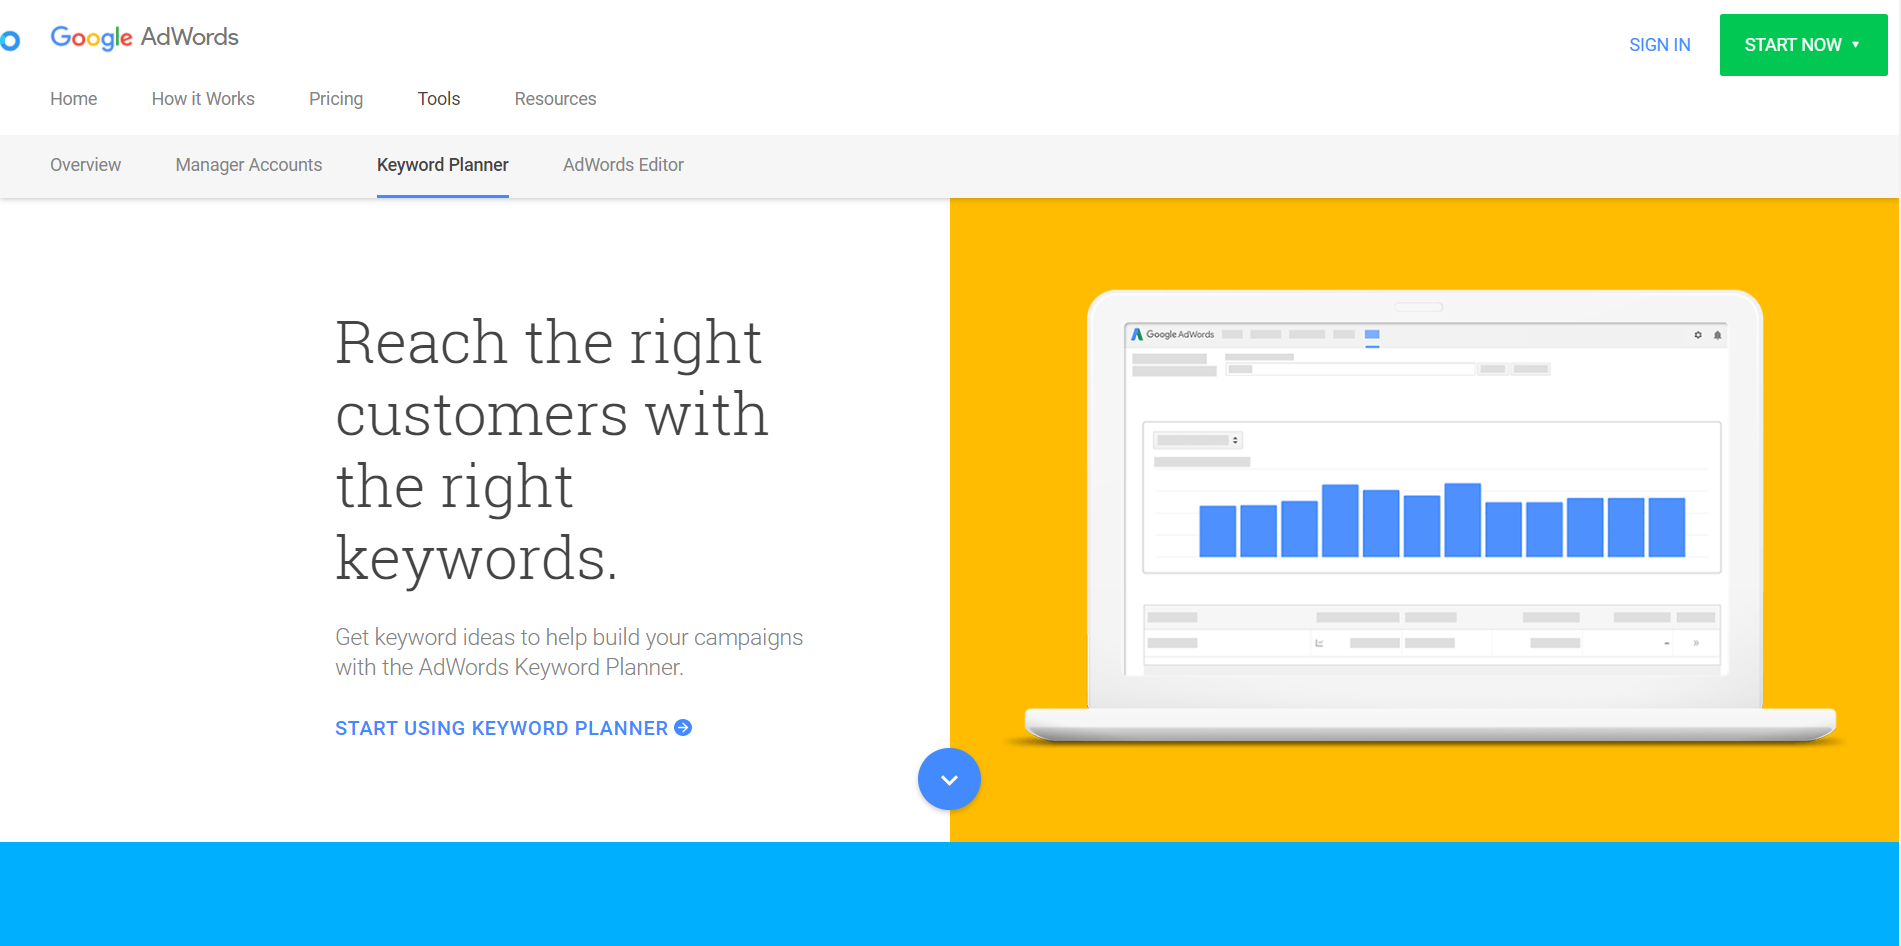 Google Keyword Planner is the go-to tools for keyword research.